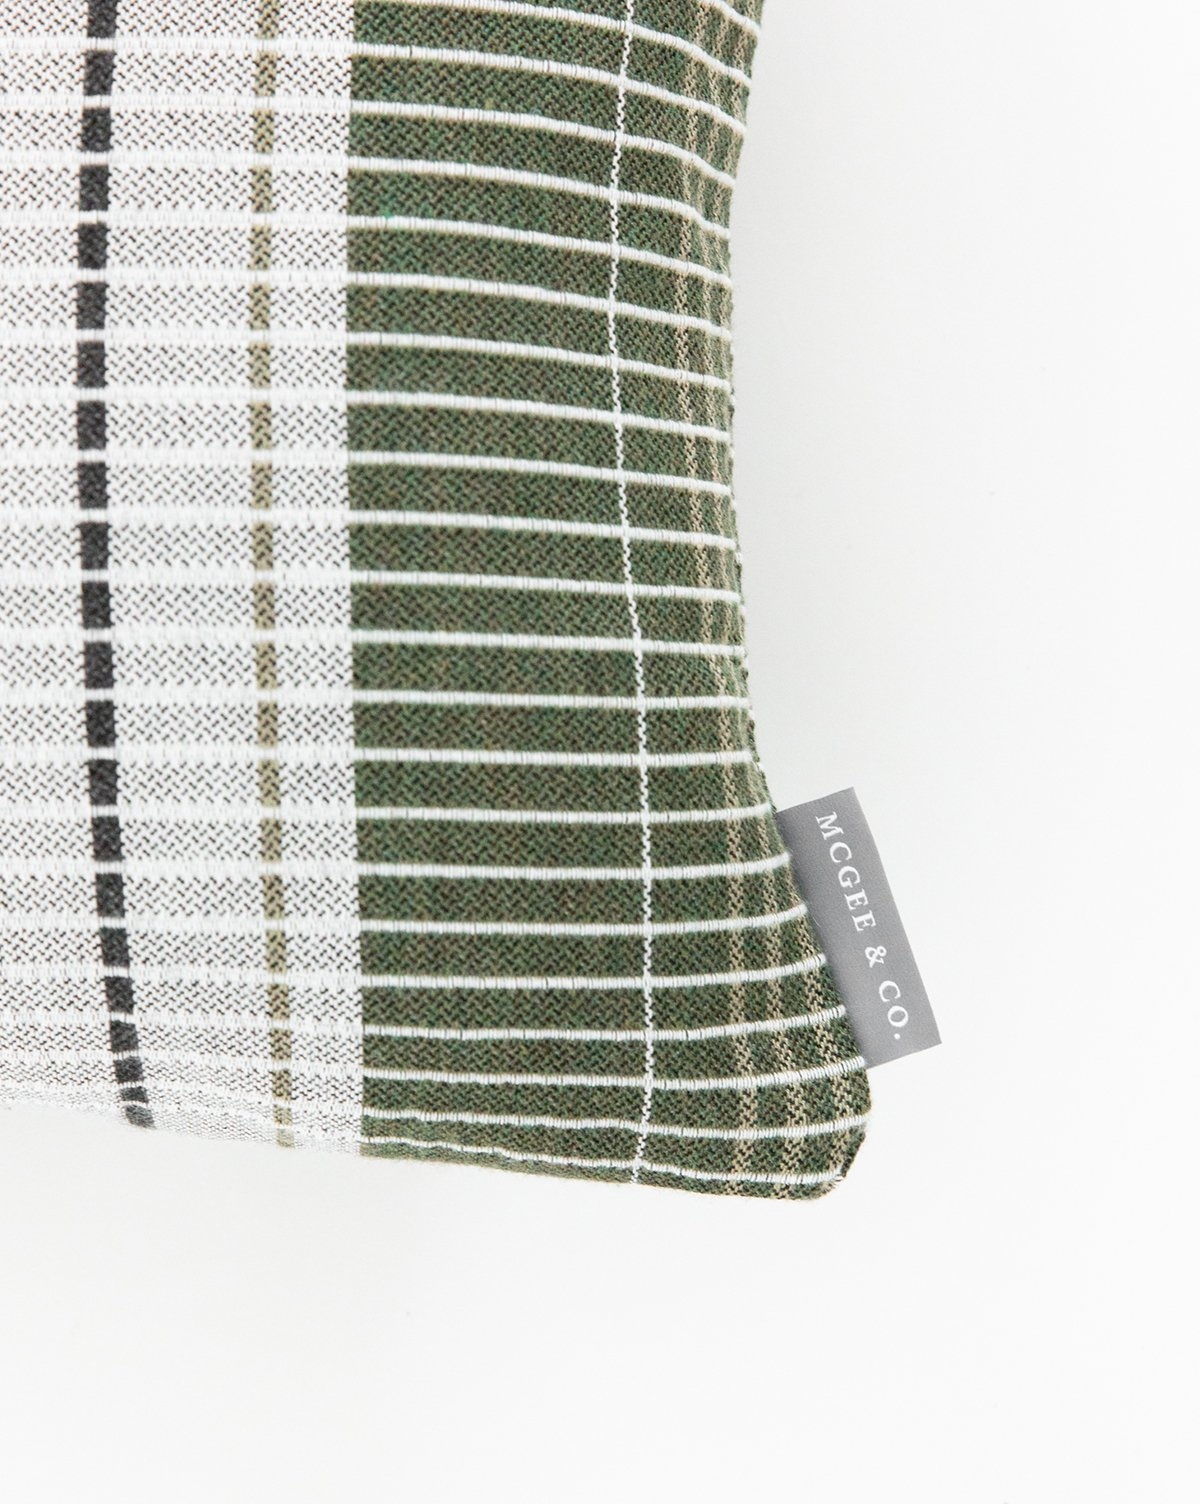 OXFORD WOVEN PLAID PILLOW WITHOUT INSERT, GREEN, 22" x 22" - Image 2